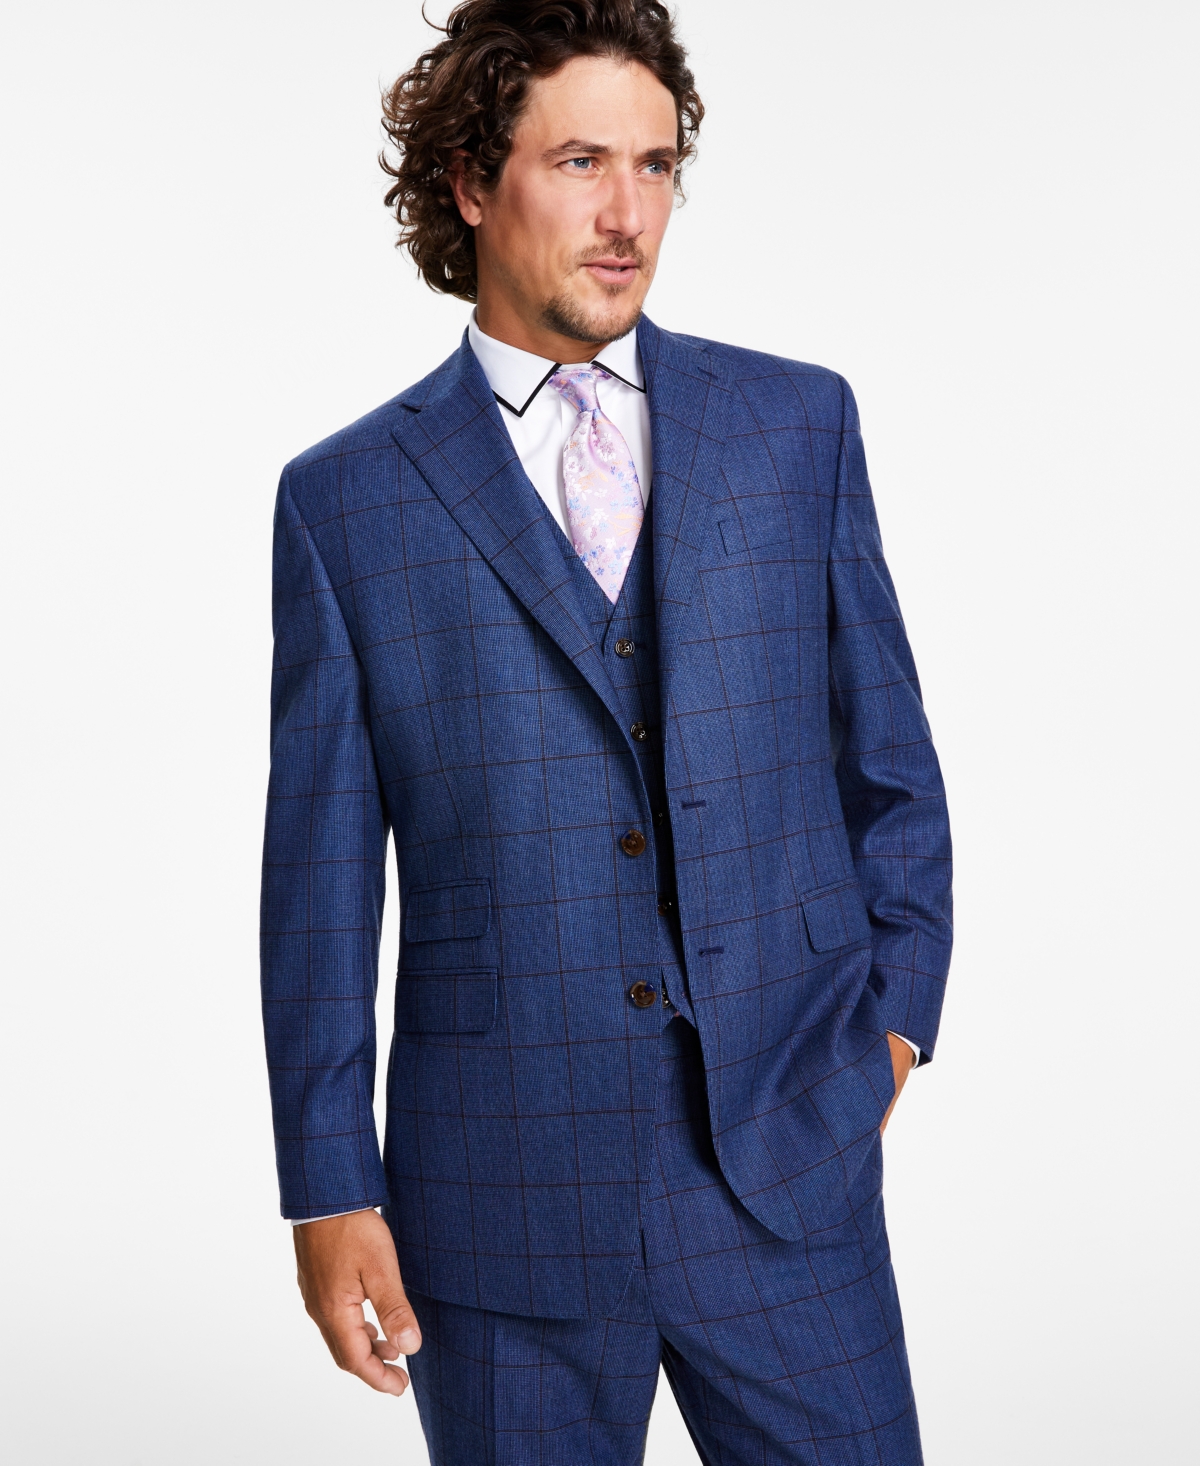 Men's Classic-Fit Stretch Navy Windowpane Suit Separates Jacket - Navy/brown